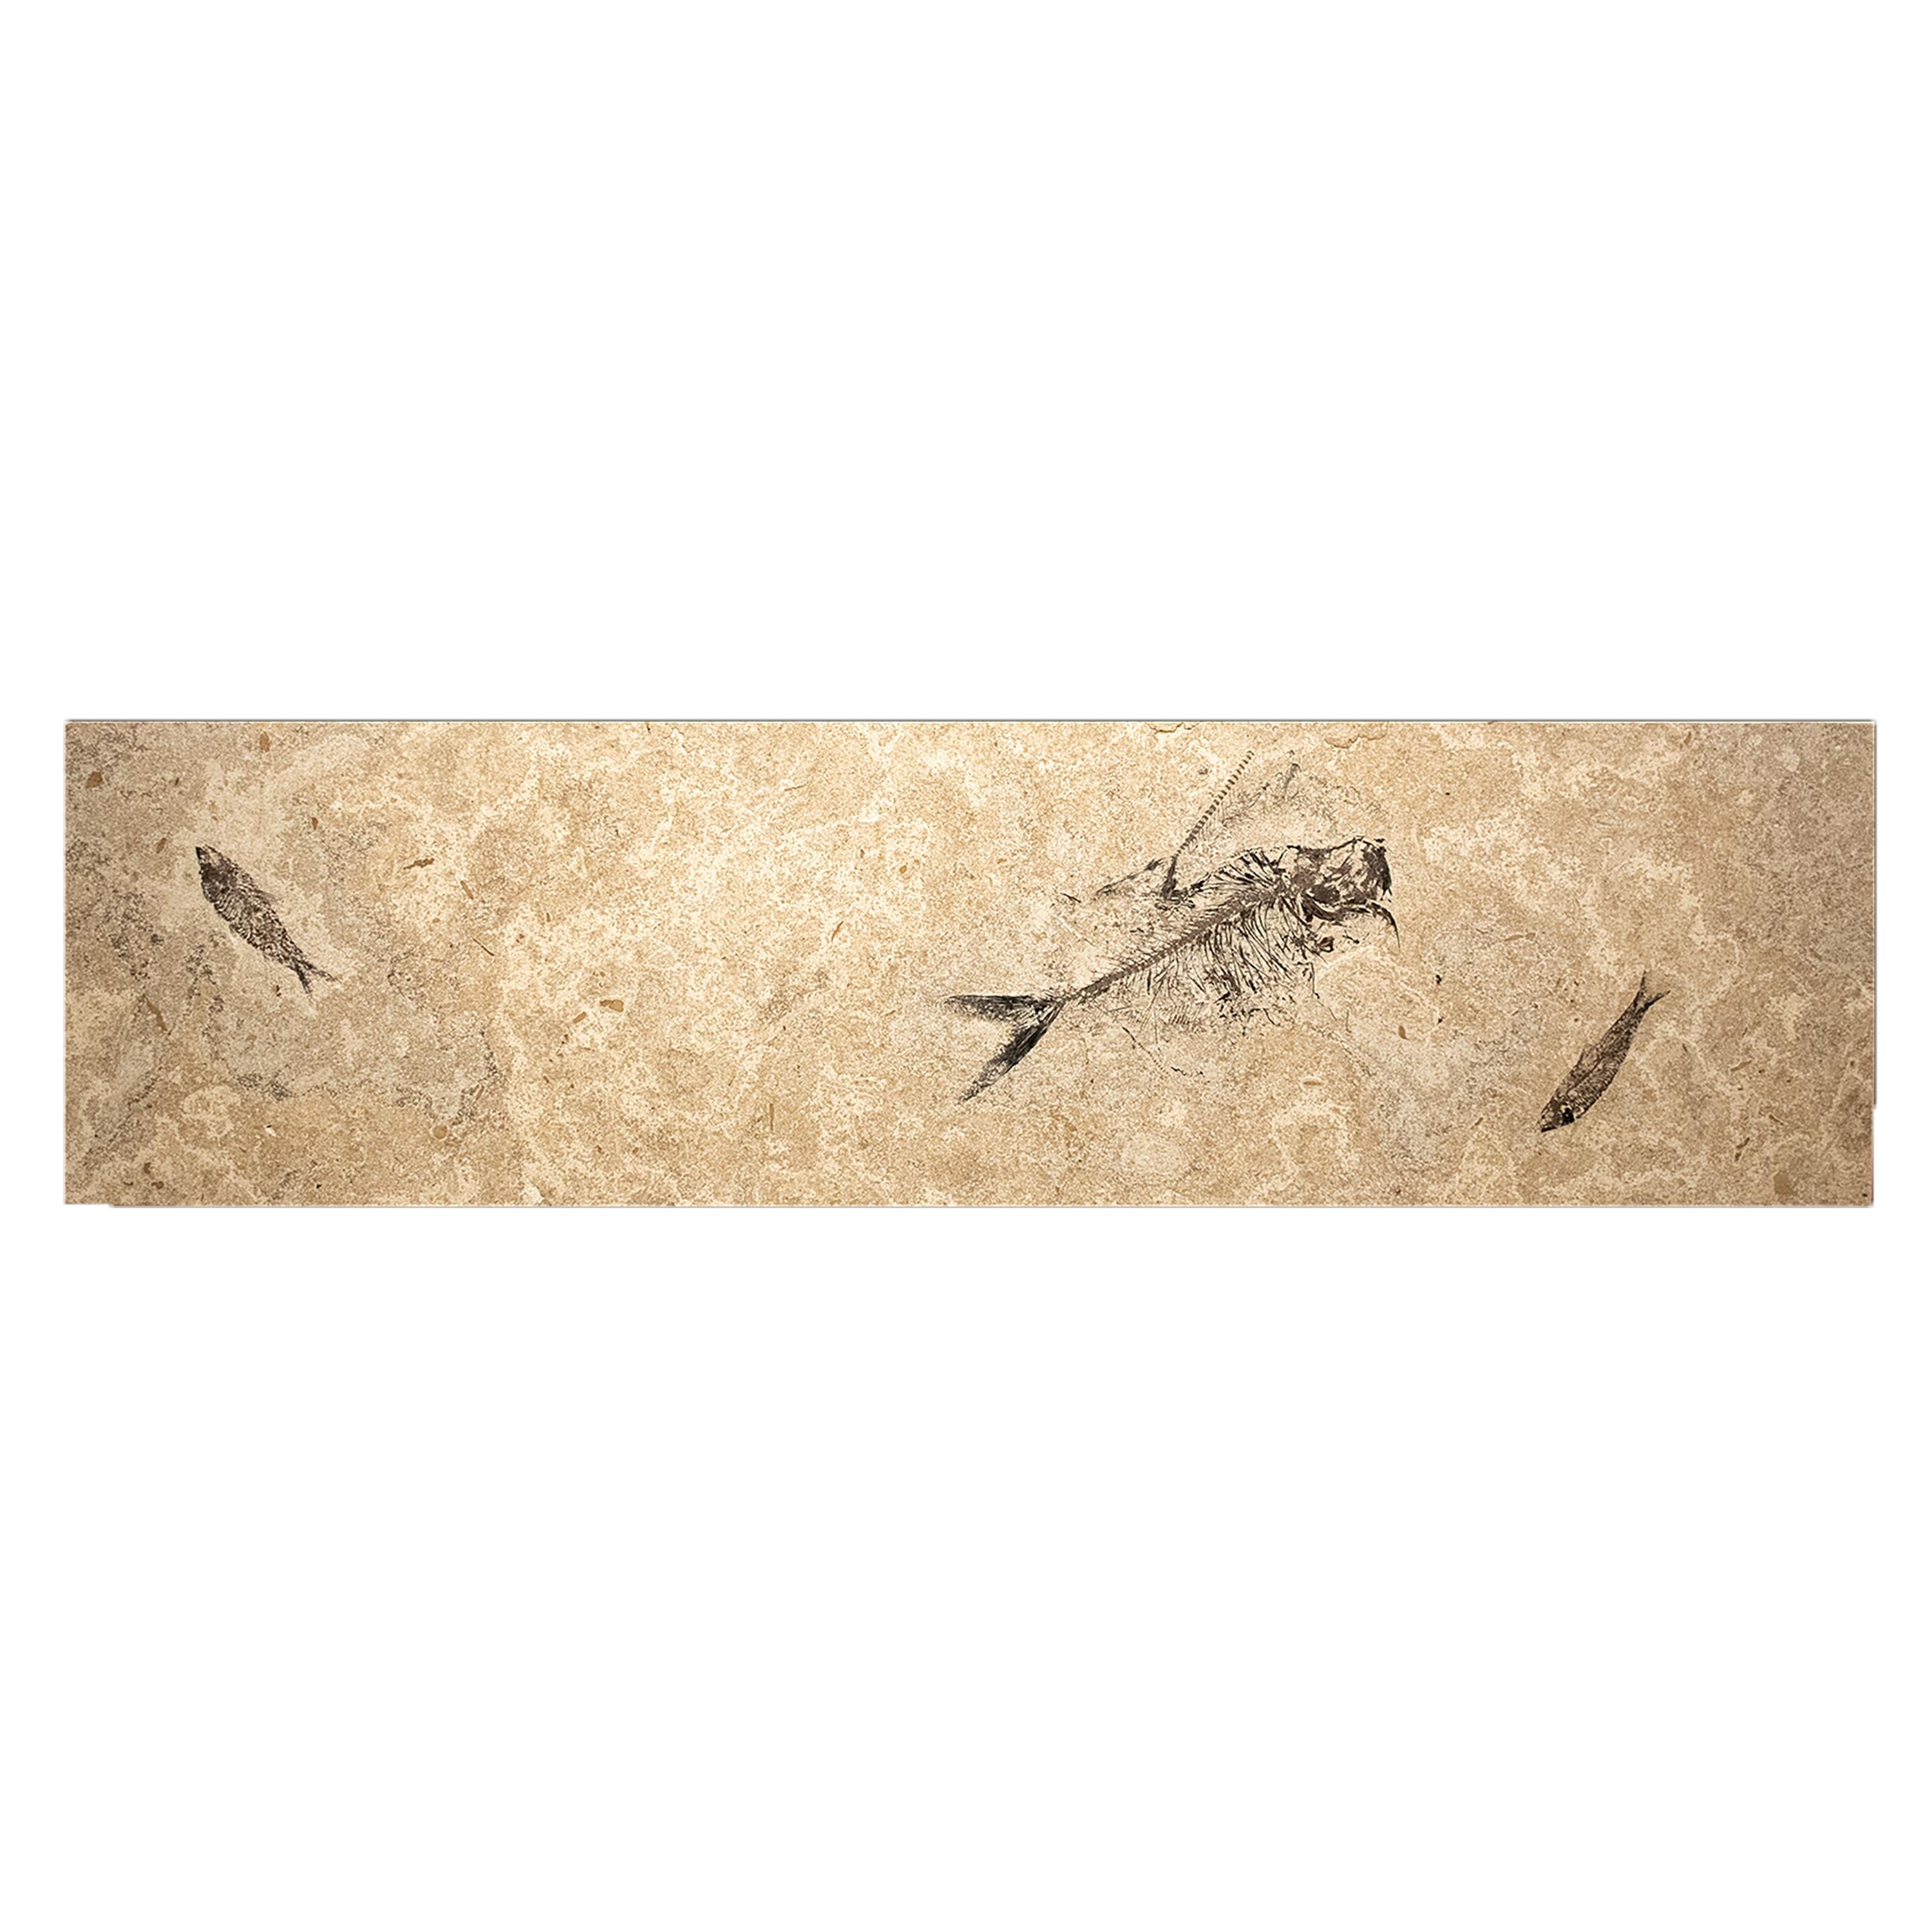 This elegant console table features three natural Eocene era fossil fish: a Diplomystus dentatus and two Knightia eocaena. These fossil fish date back about 50 million years, and they are forever preserved in a matrix of natural, fossil-bearing